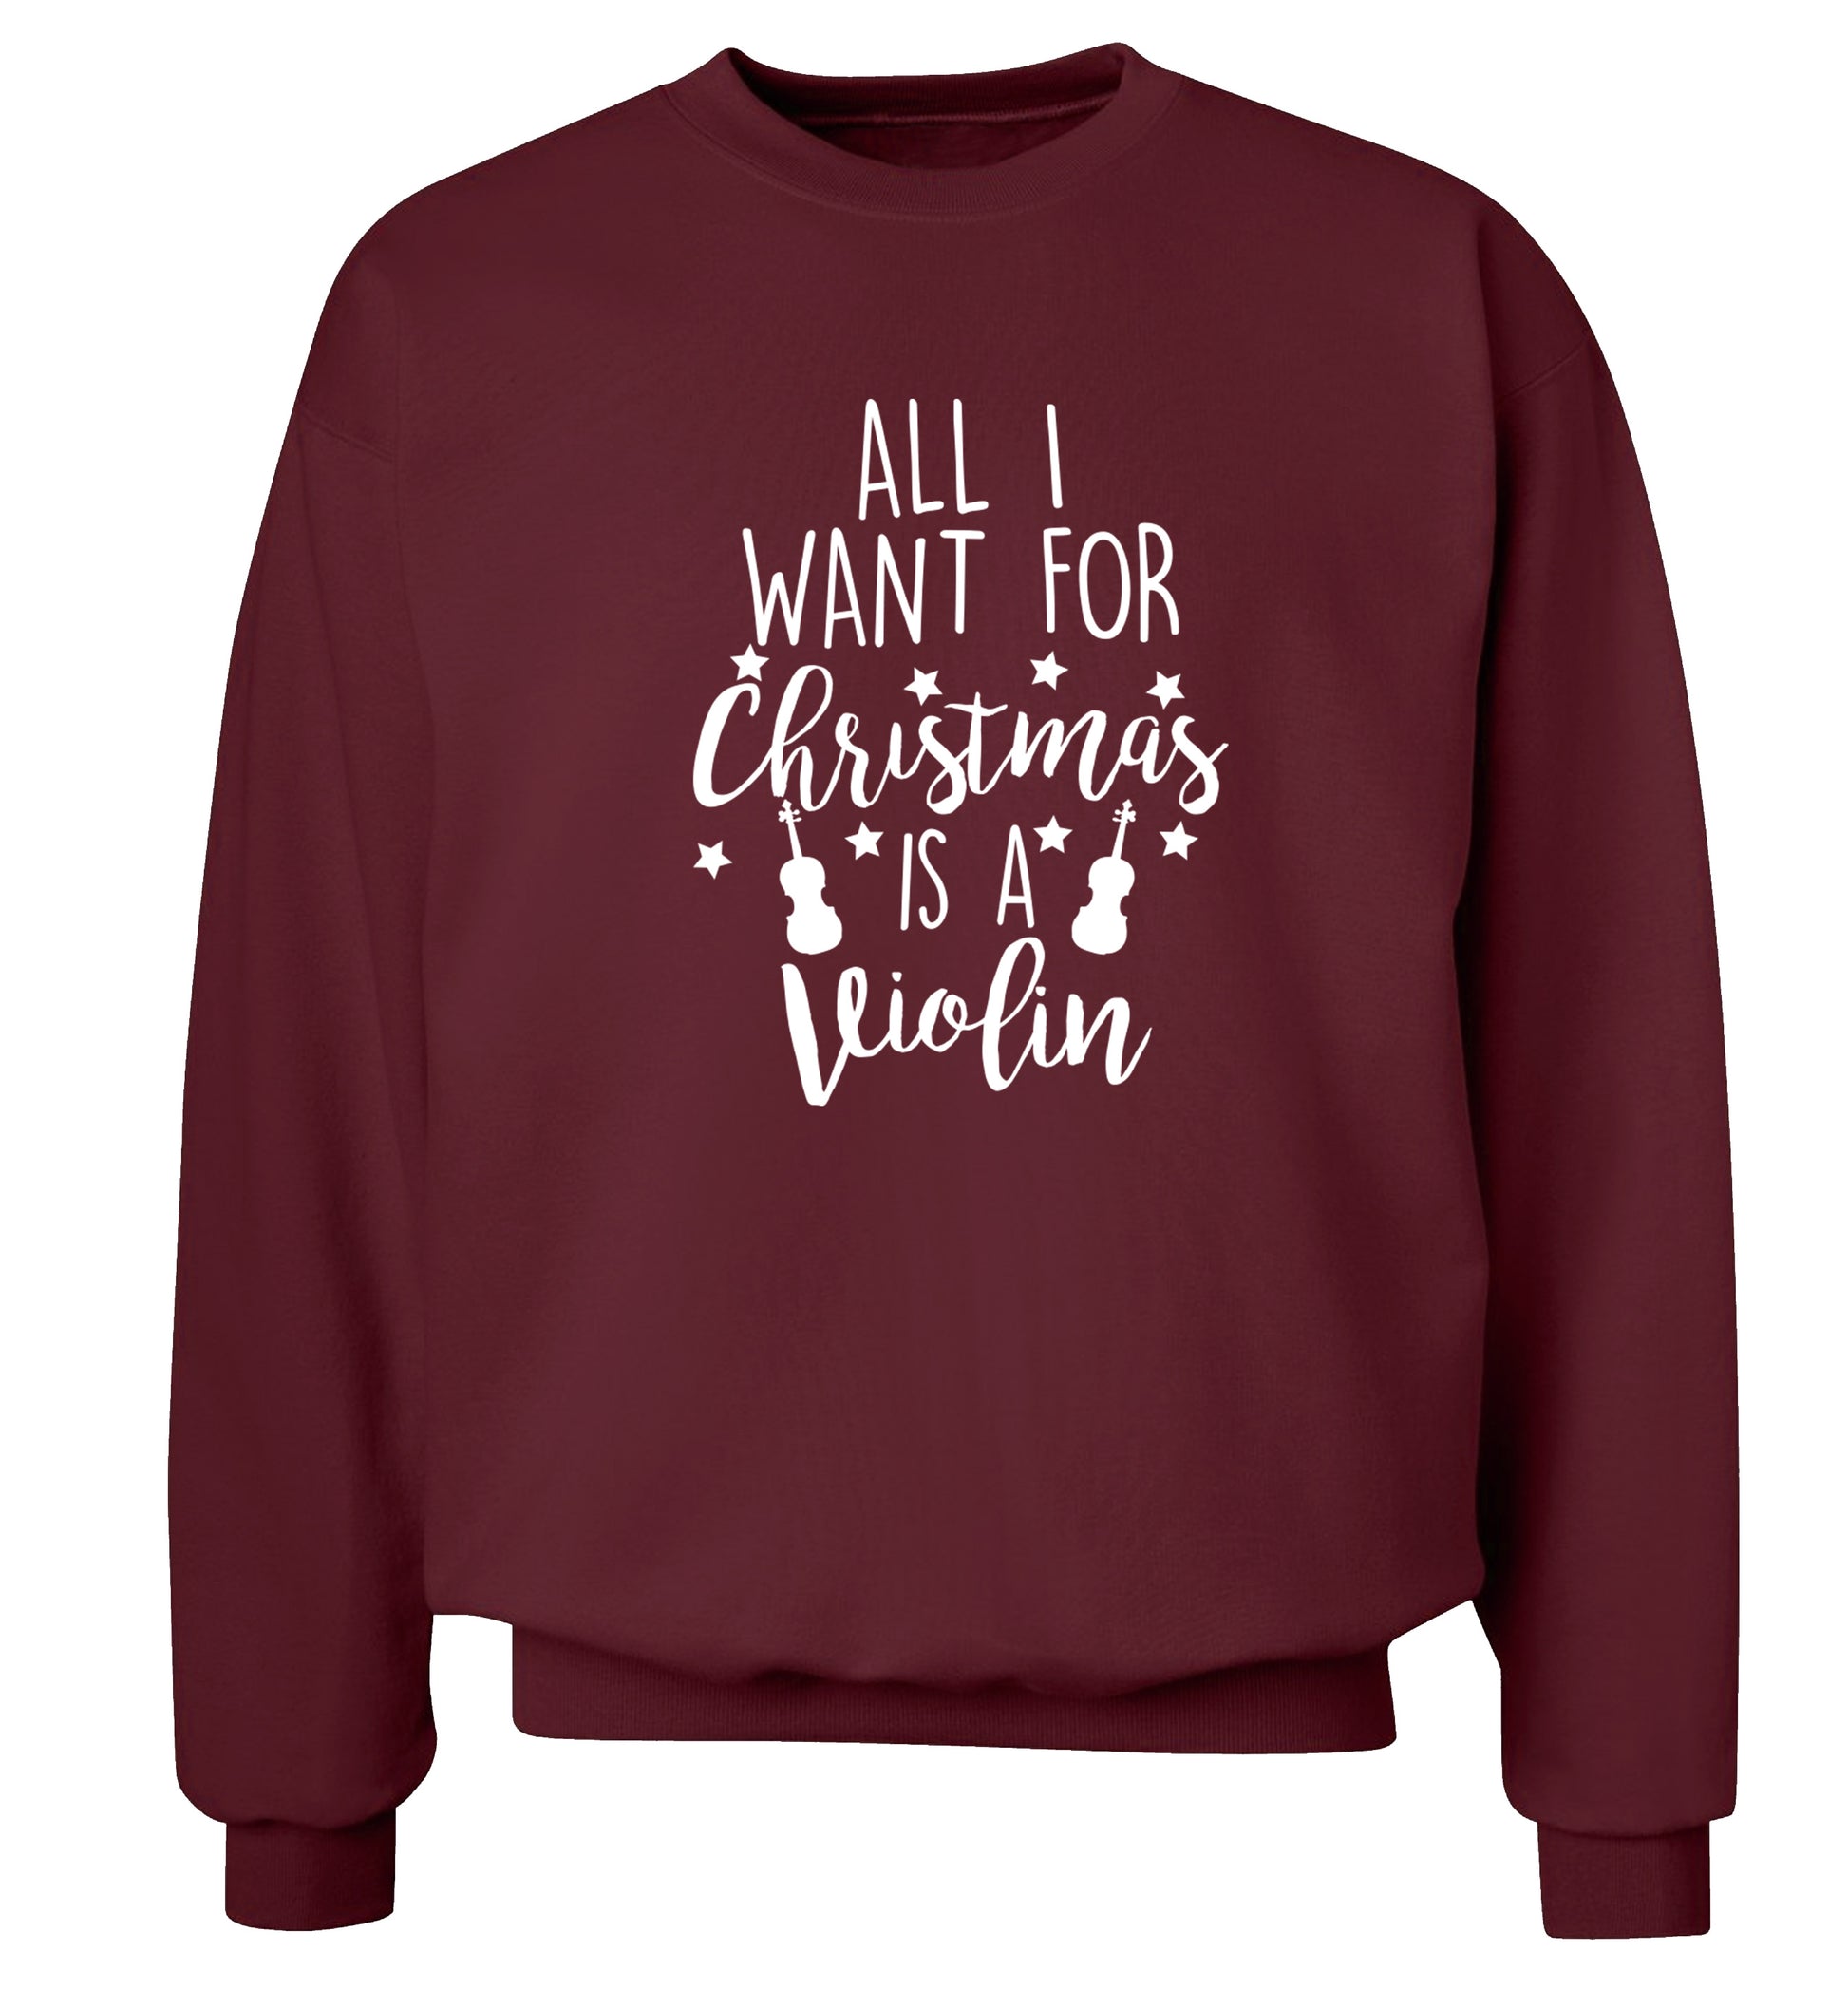 All I Want For Christmas is a Violin Adult's unisex maroon Sweater 2XL